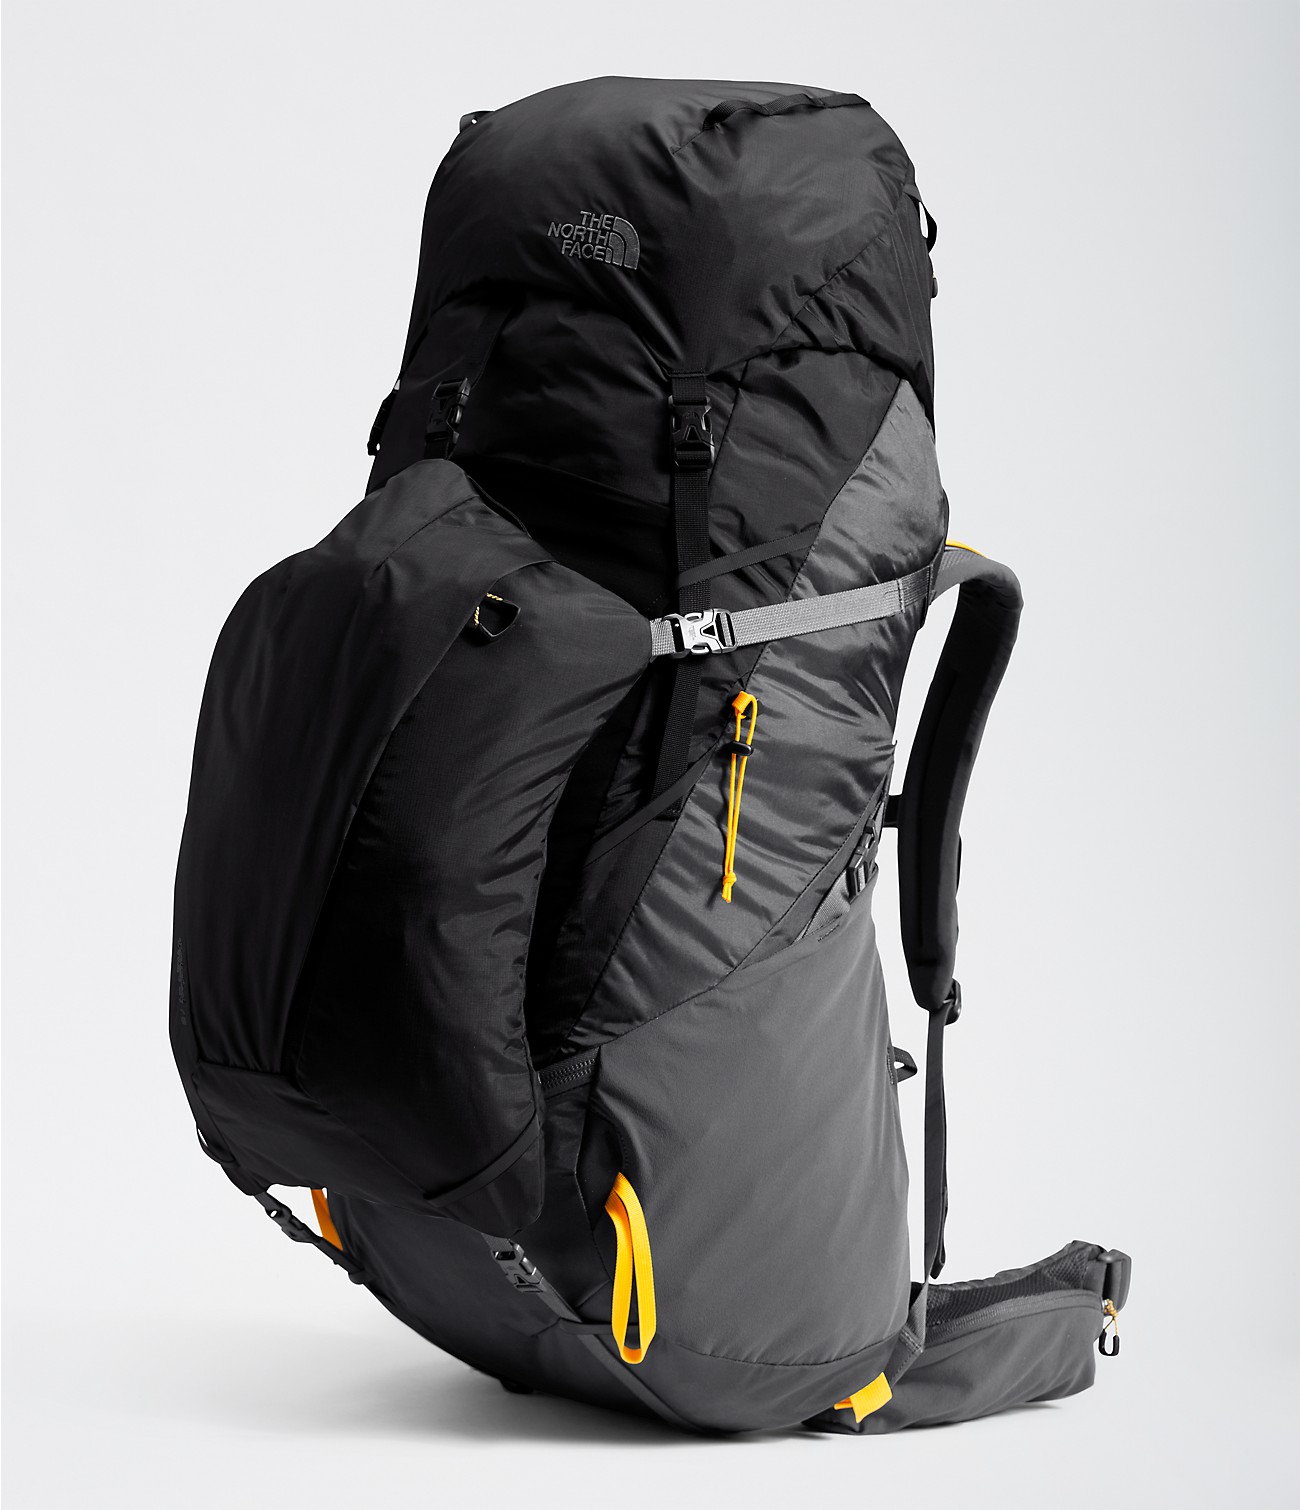 Griffin 75 Backpack | The North Face